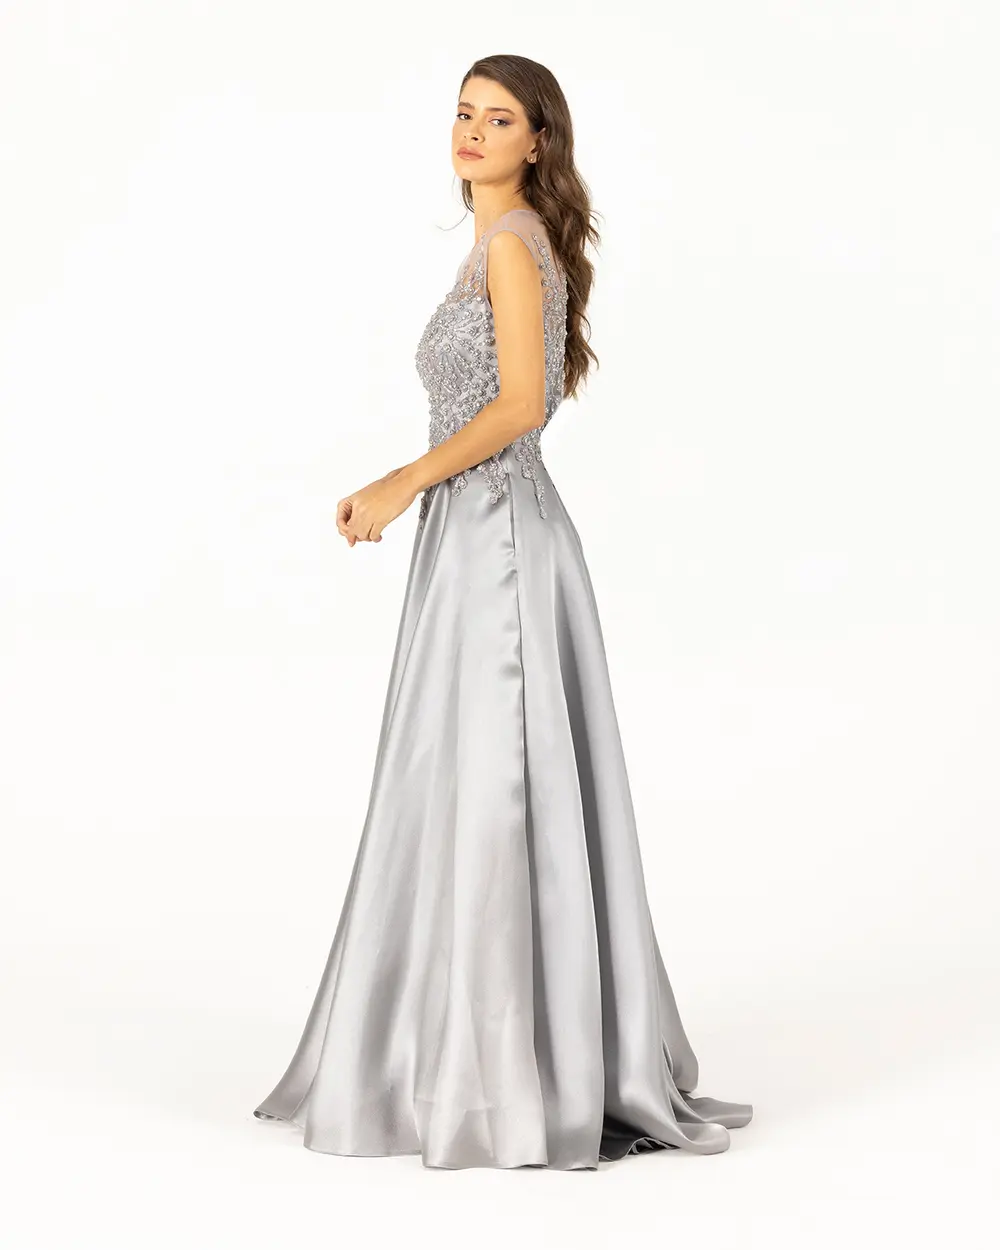 Buy Stylee Lifestyle Grey Net Embroidered Gown Style 3818 at Amazon.in